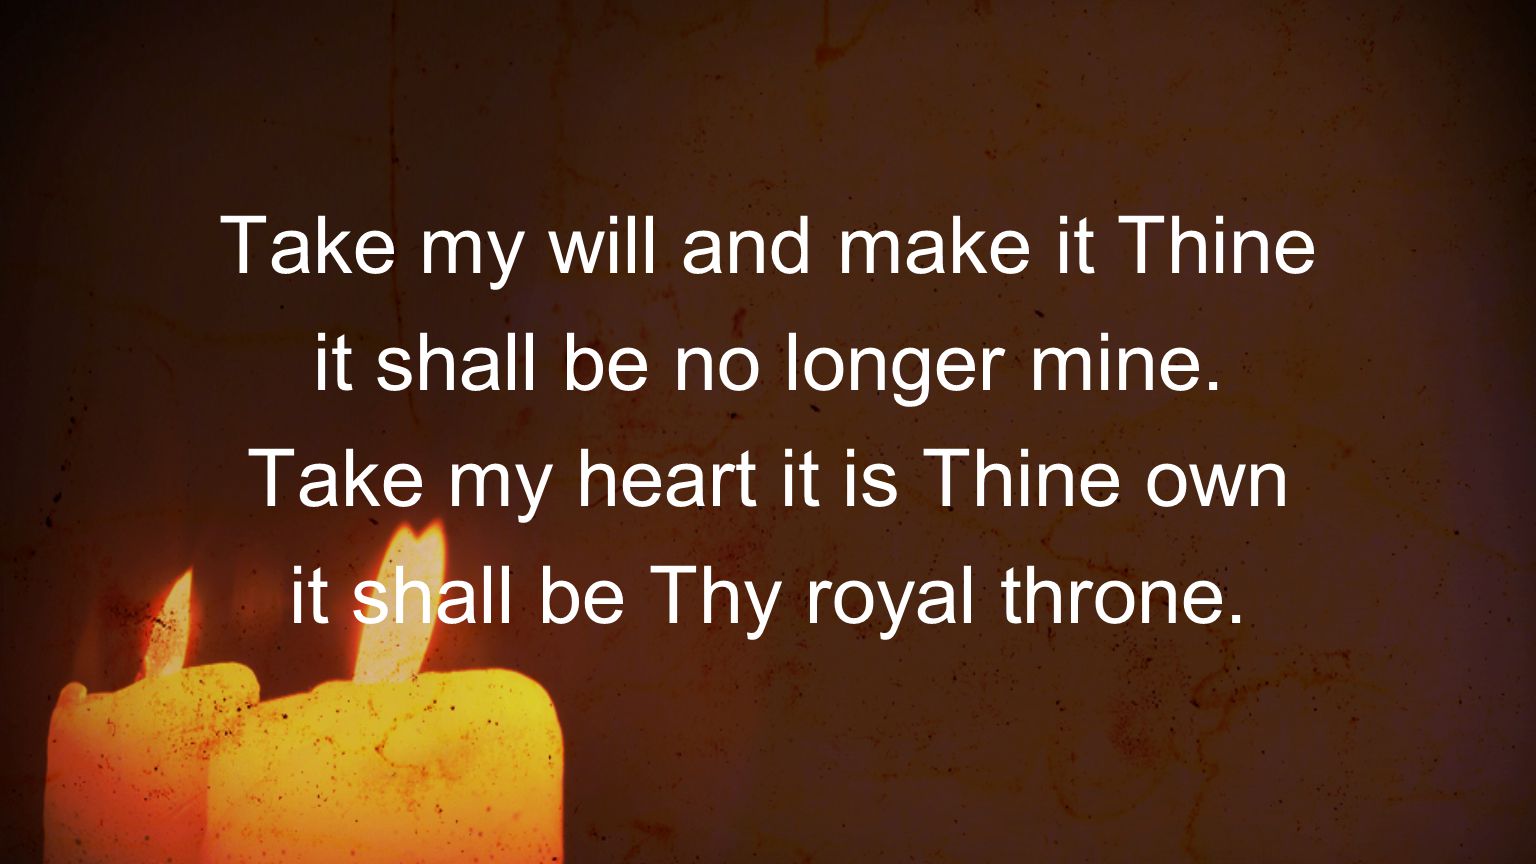 Take my will and make it Thine it shall be no longer mine.